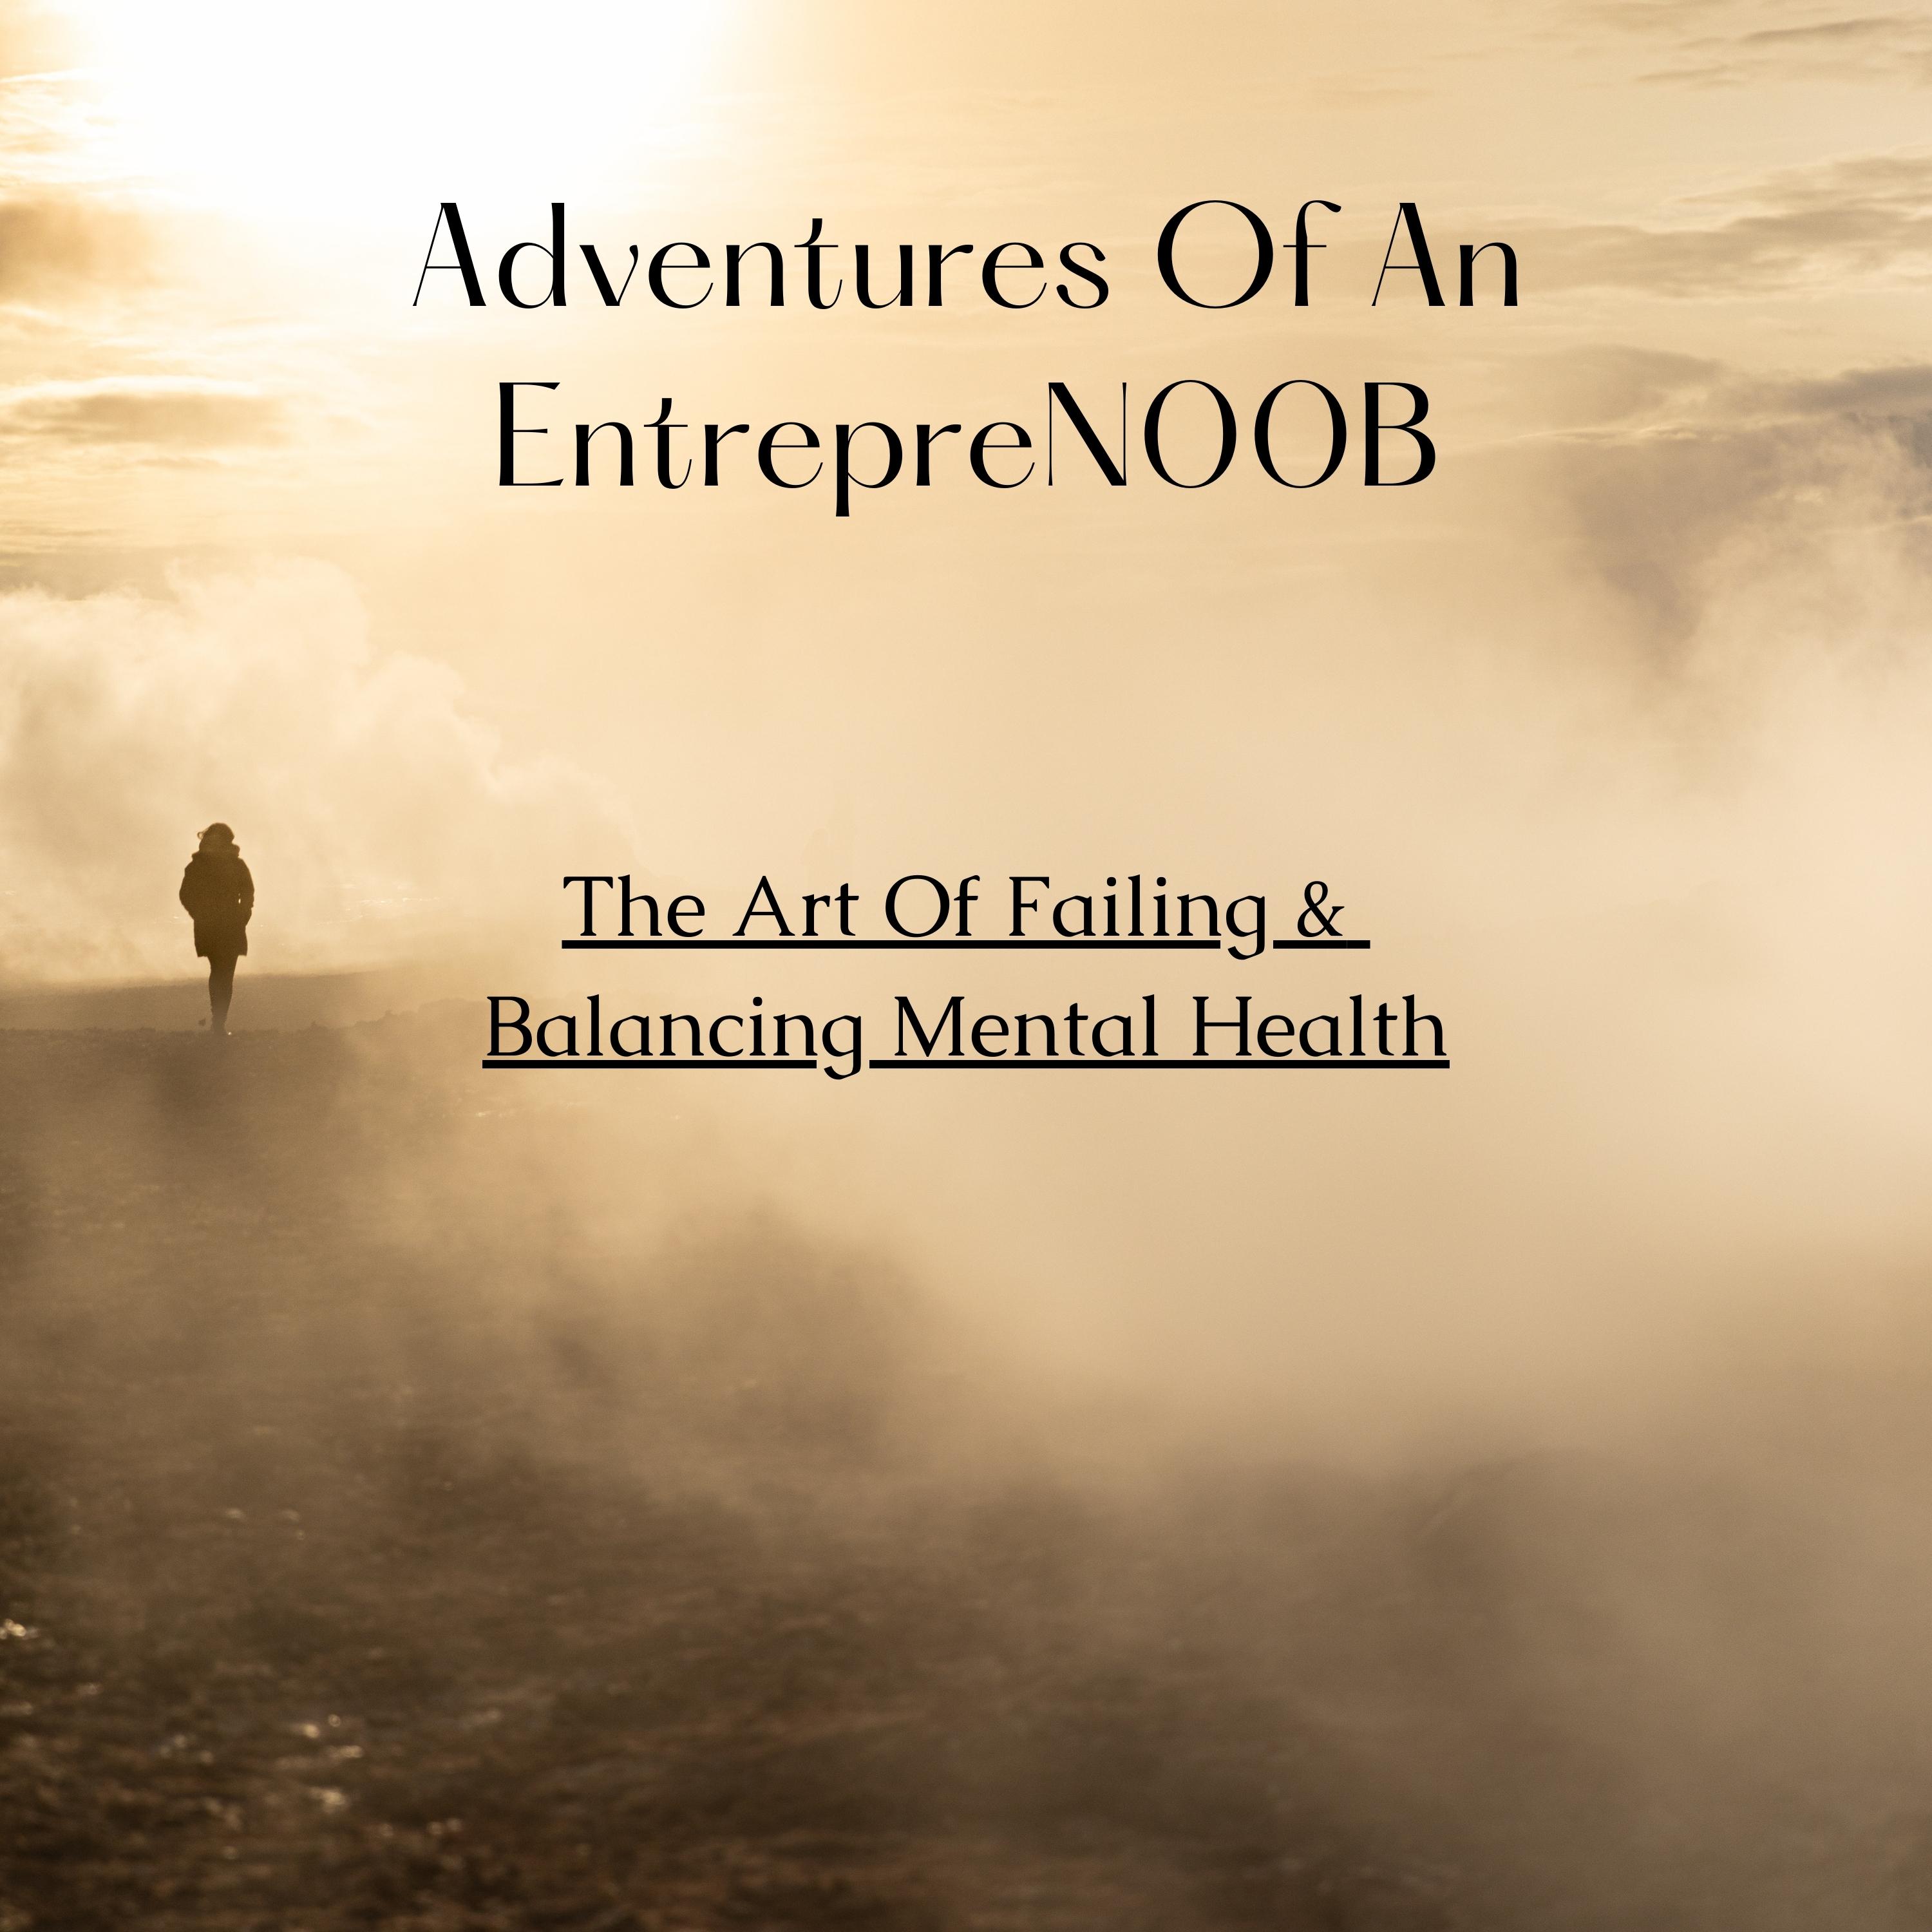 Steam rising from the ground, a silhouetted figure to the left-center of the image. With the caption 'Adventures of an Entrepren00b: The art of failing and balancing mental health'.